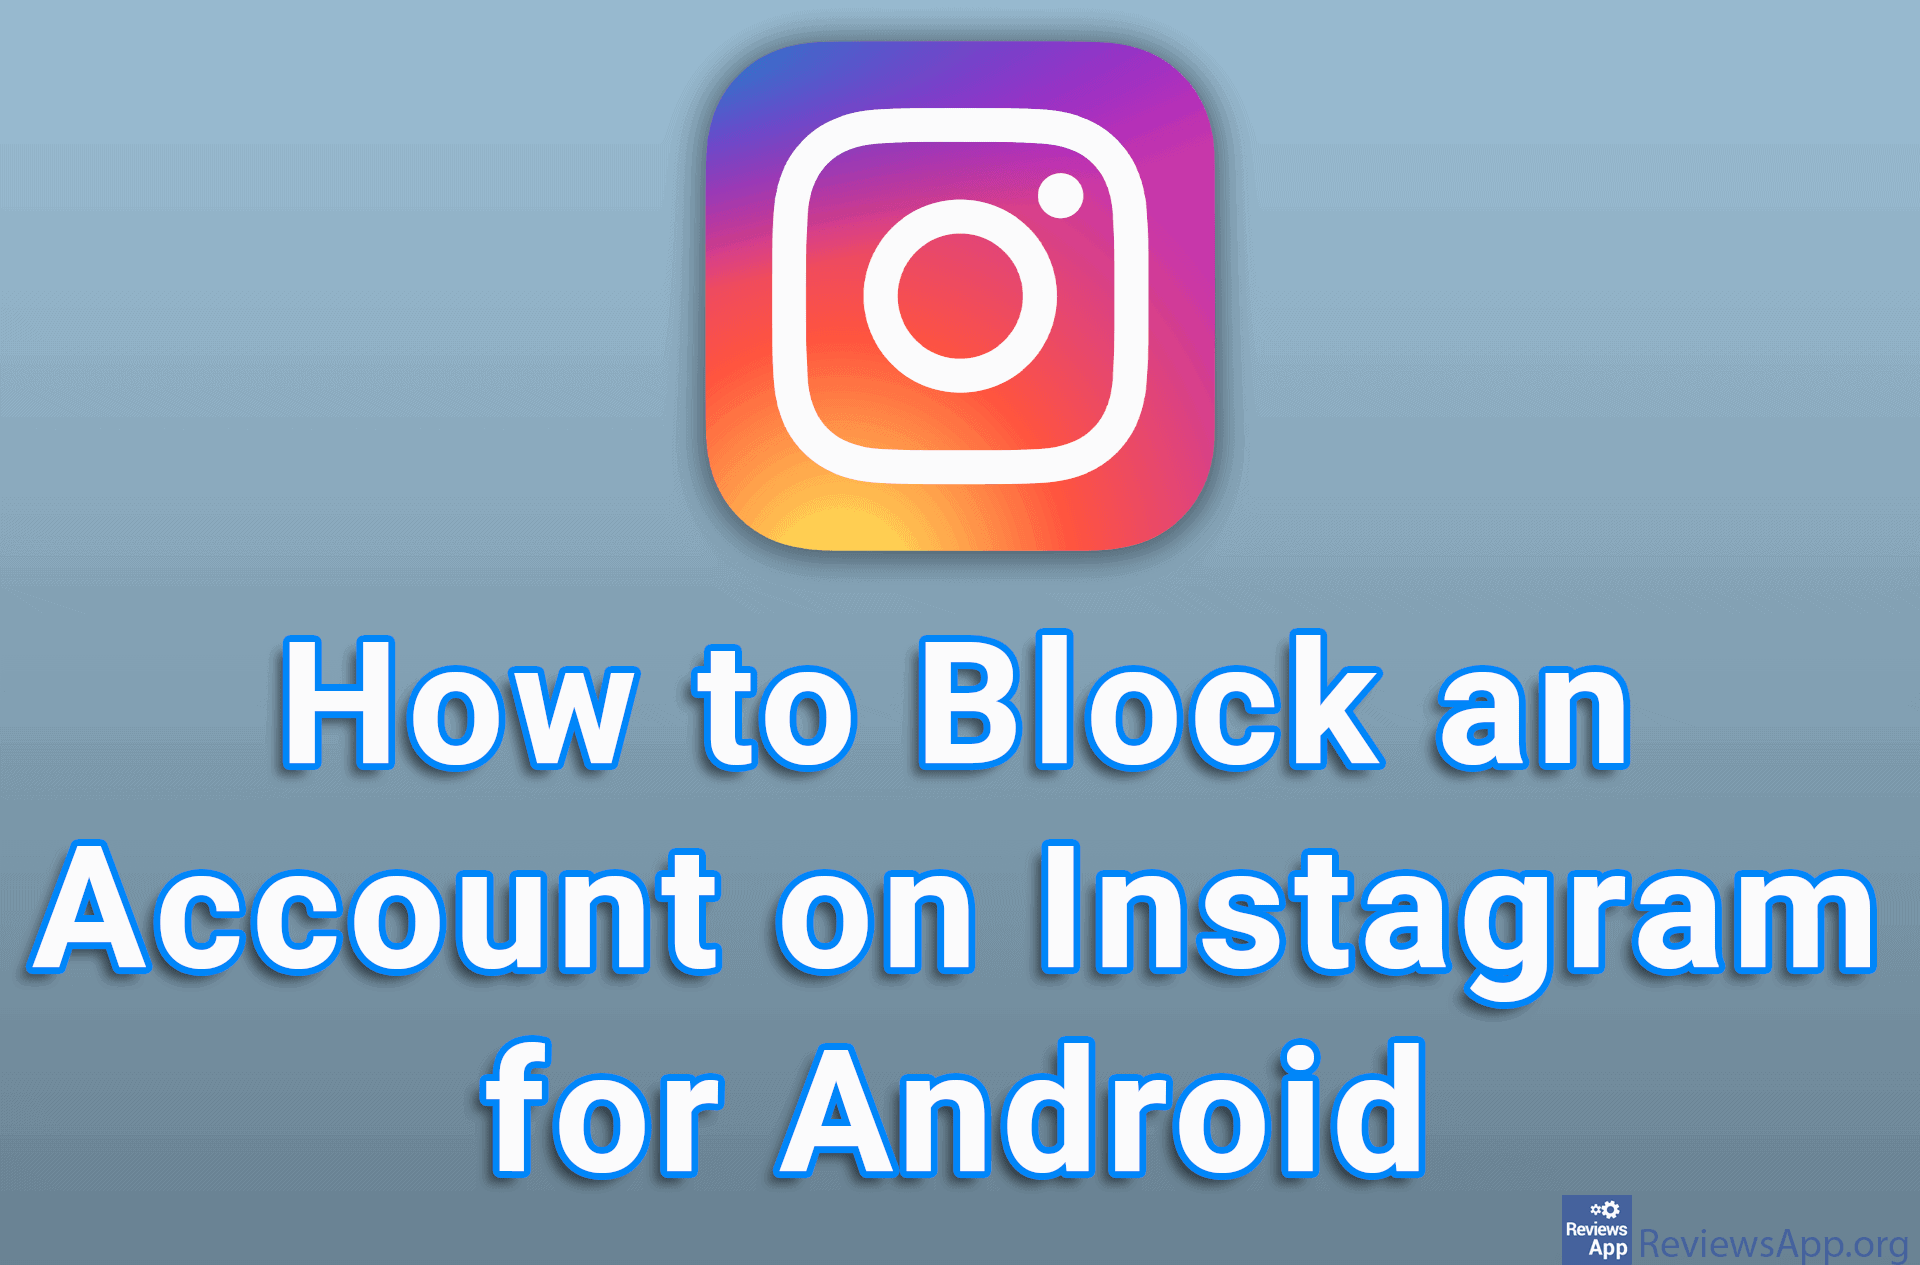 How to Block an Account on Instagram for Android